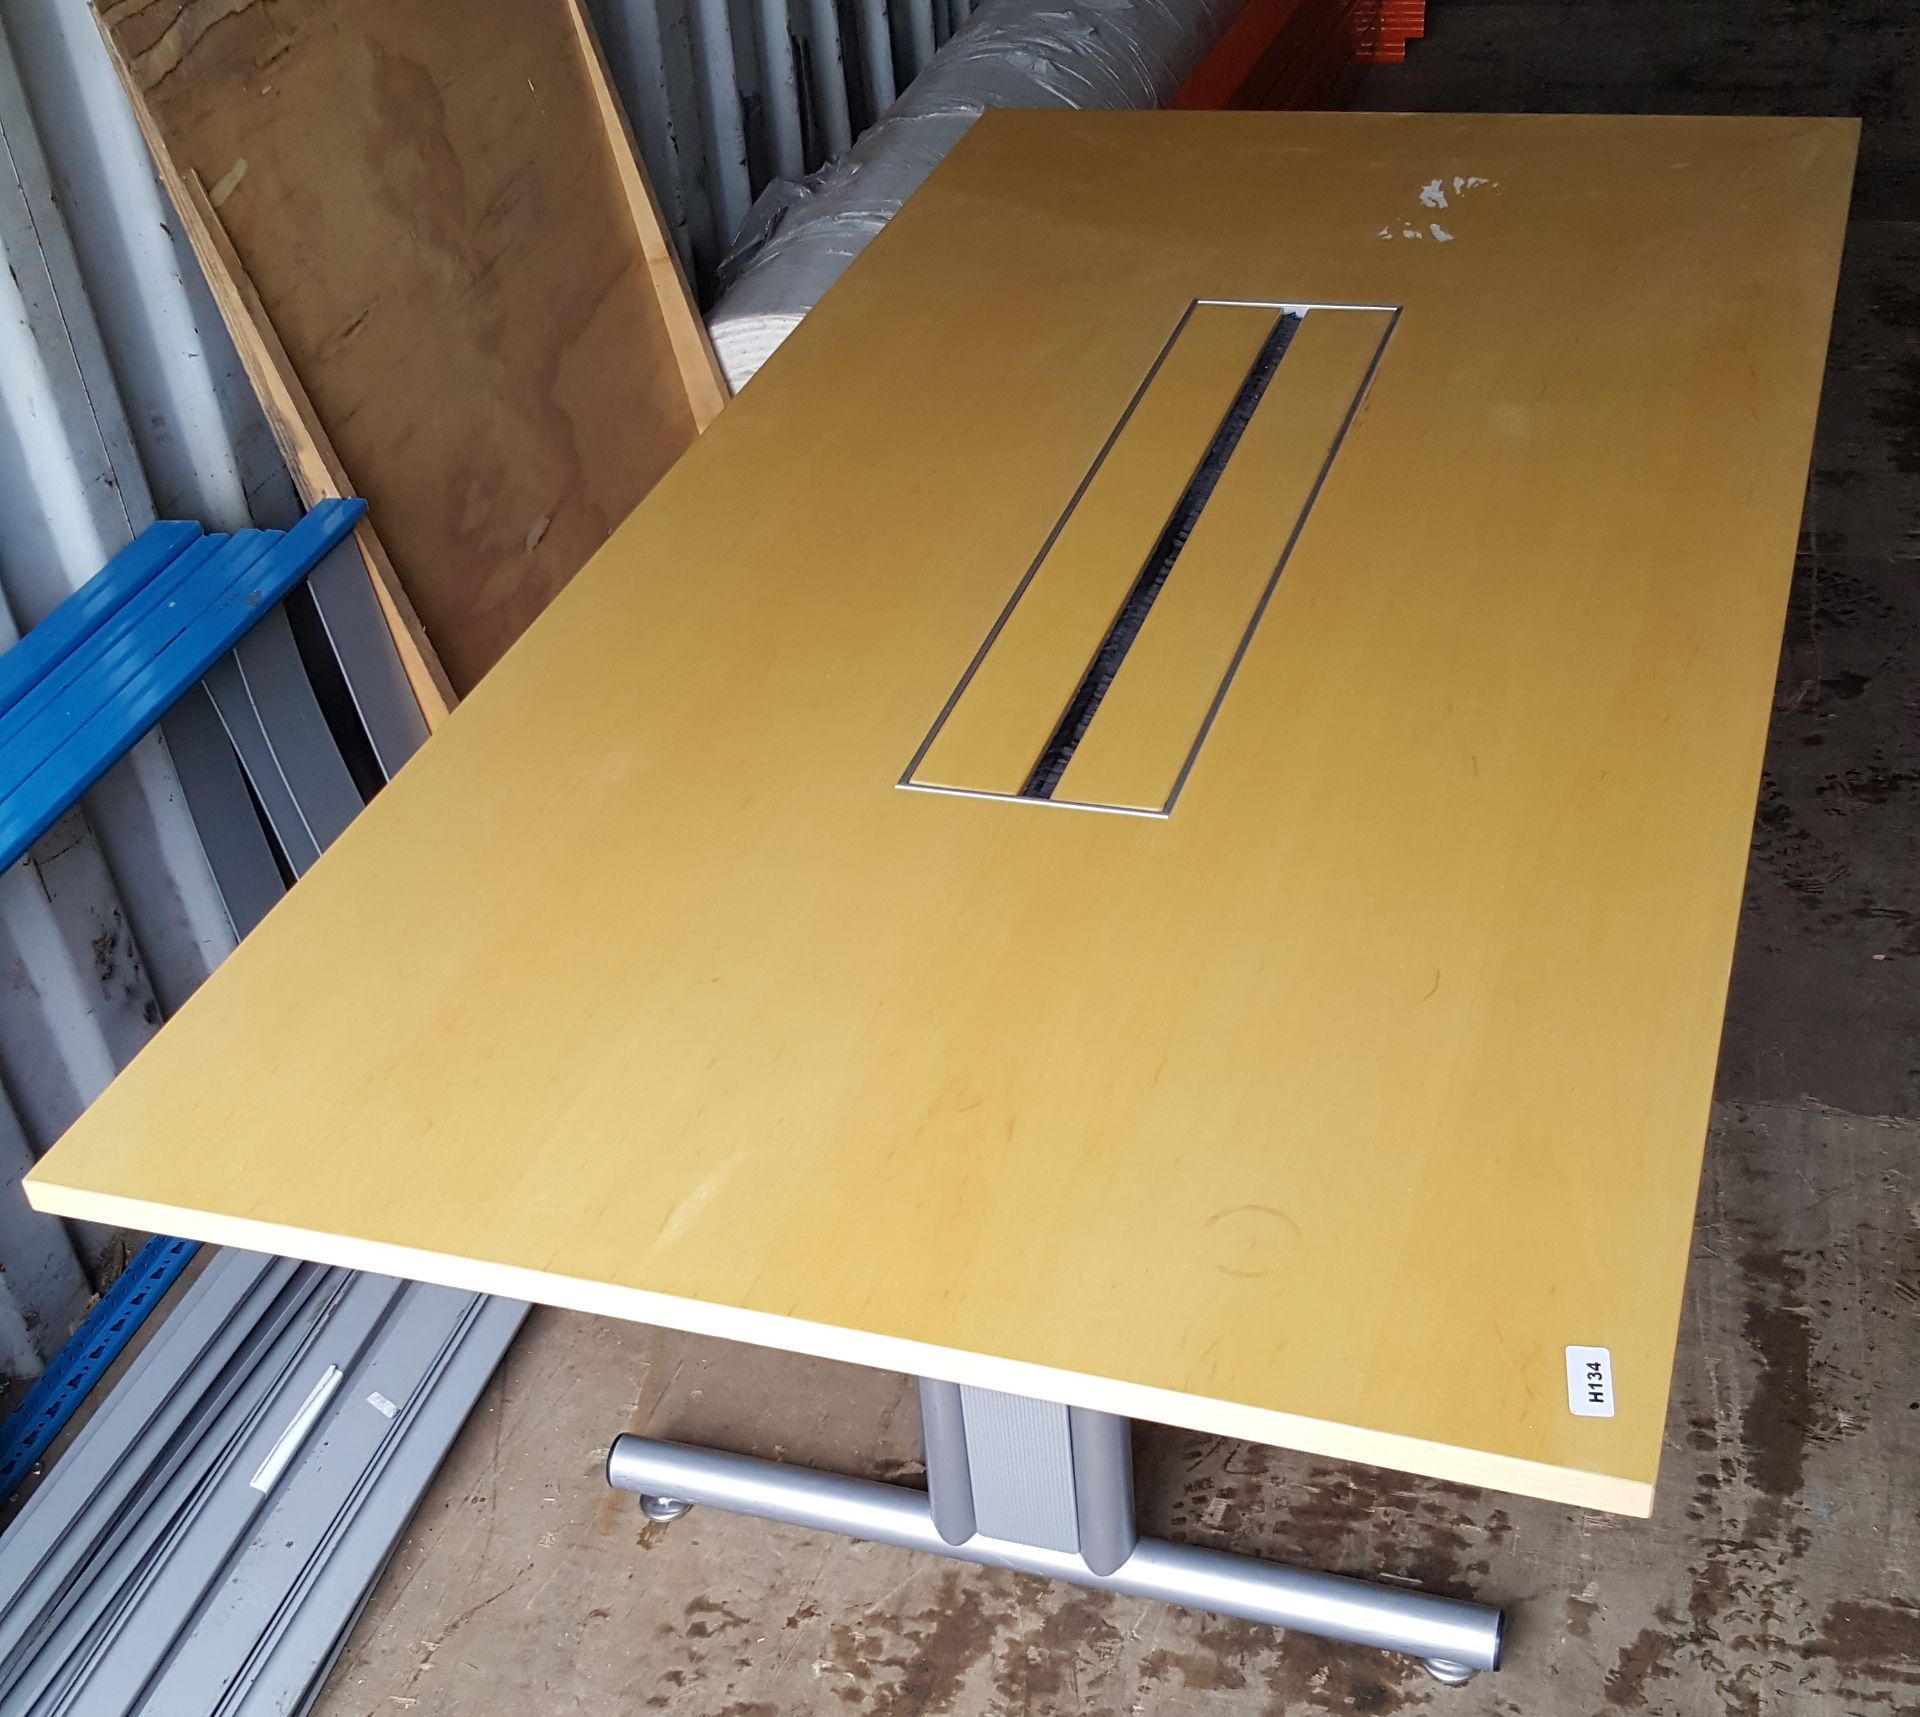 1 x Office Boardroom Meeting Table With Center Access For Cables - H73 x W200 x D100 cms - Ref H134 - Image 5 of 5